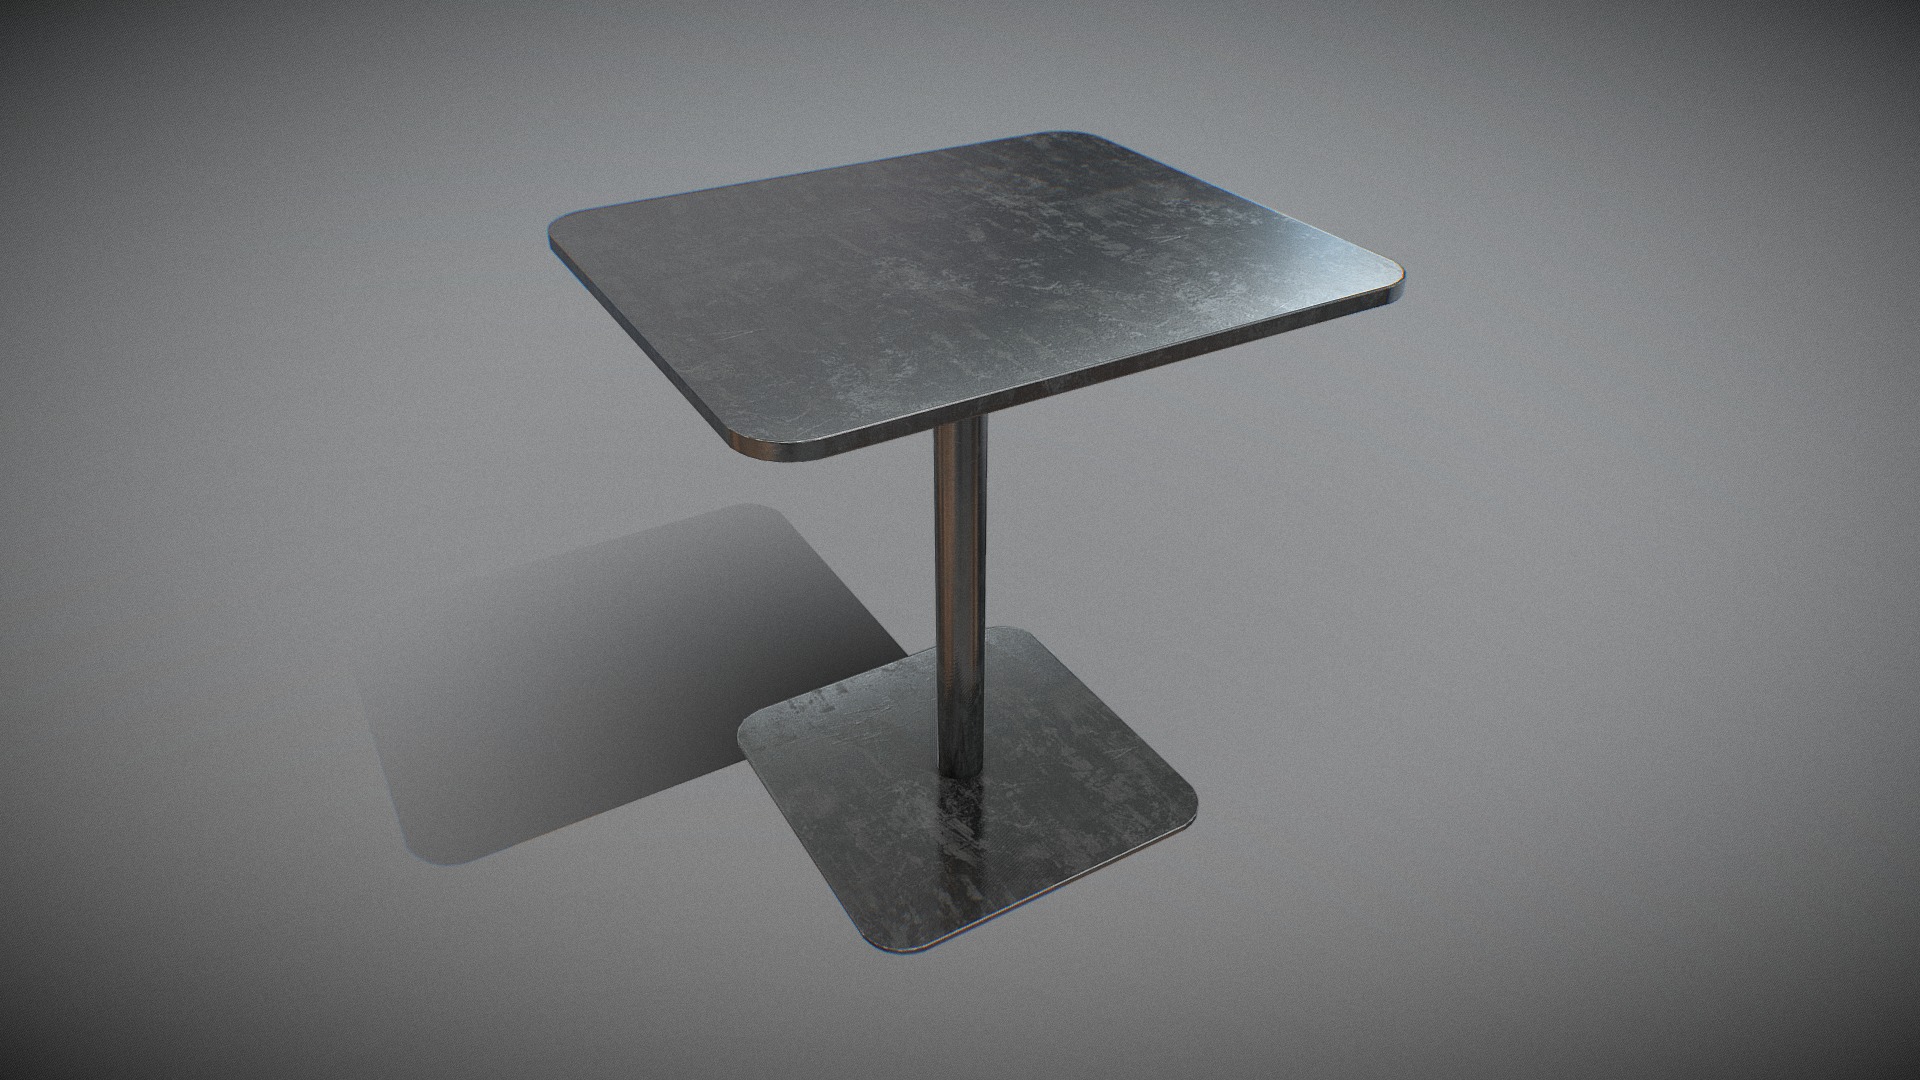 3D model MESA Cafe Table 4671-steel - This is a 3D model of the MESA Cafe Table 4671-steel. The 3D model is about a wooden table with a metal top.